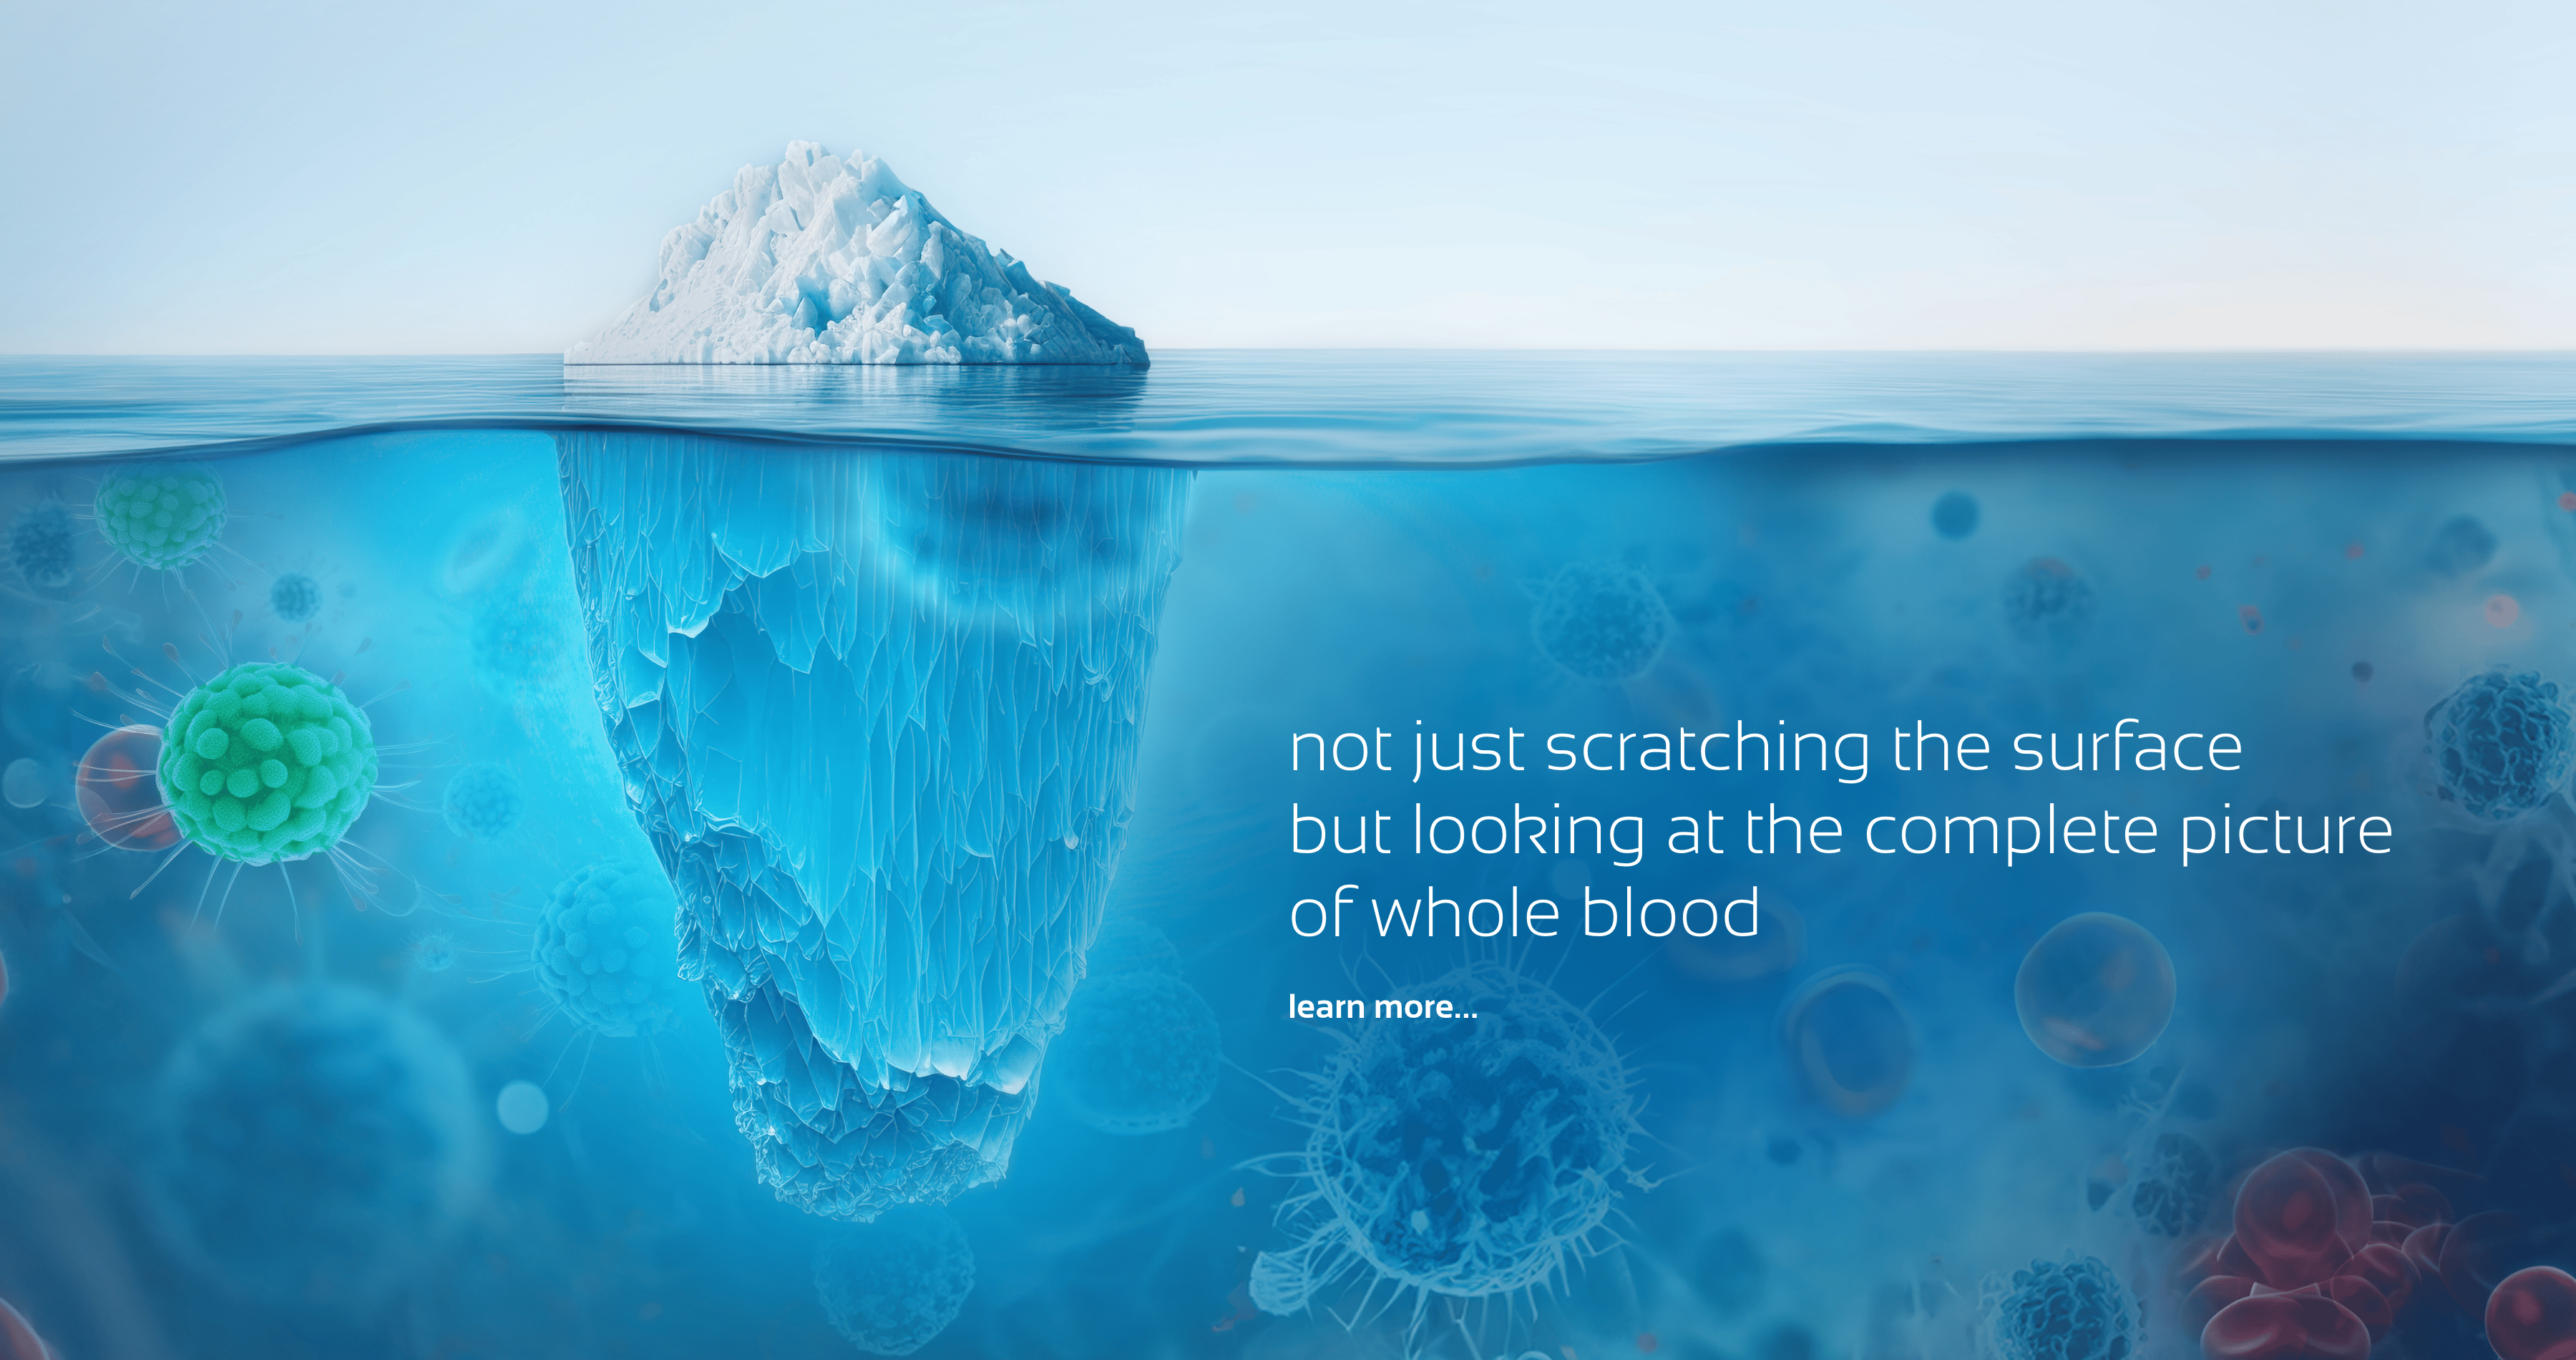 iceberg – we look at what others don’t see